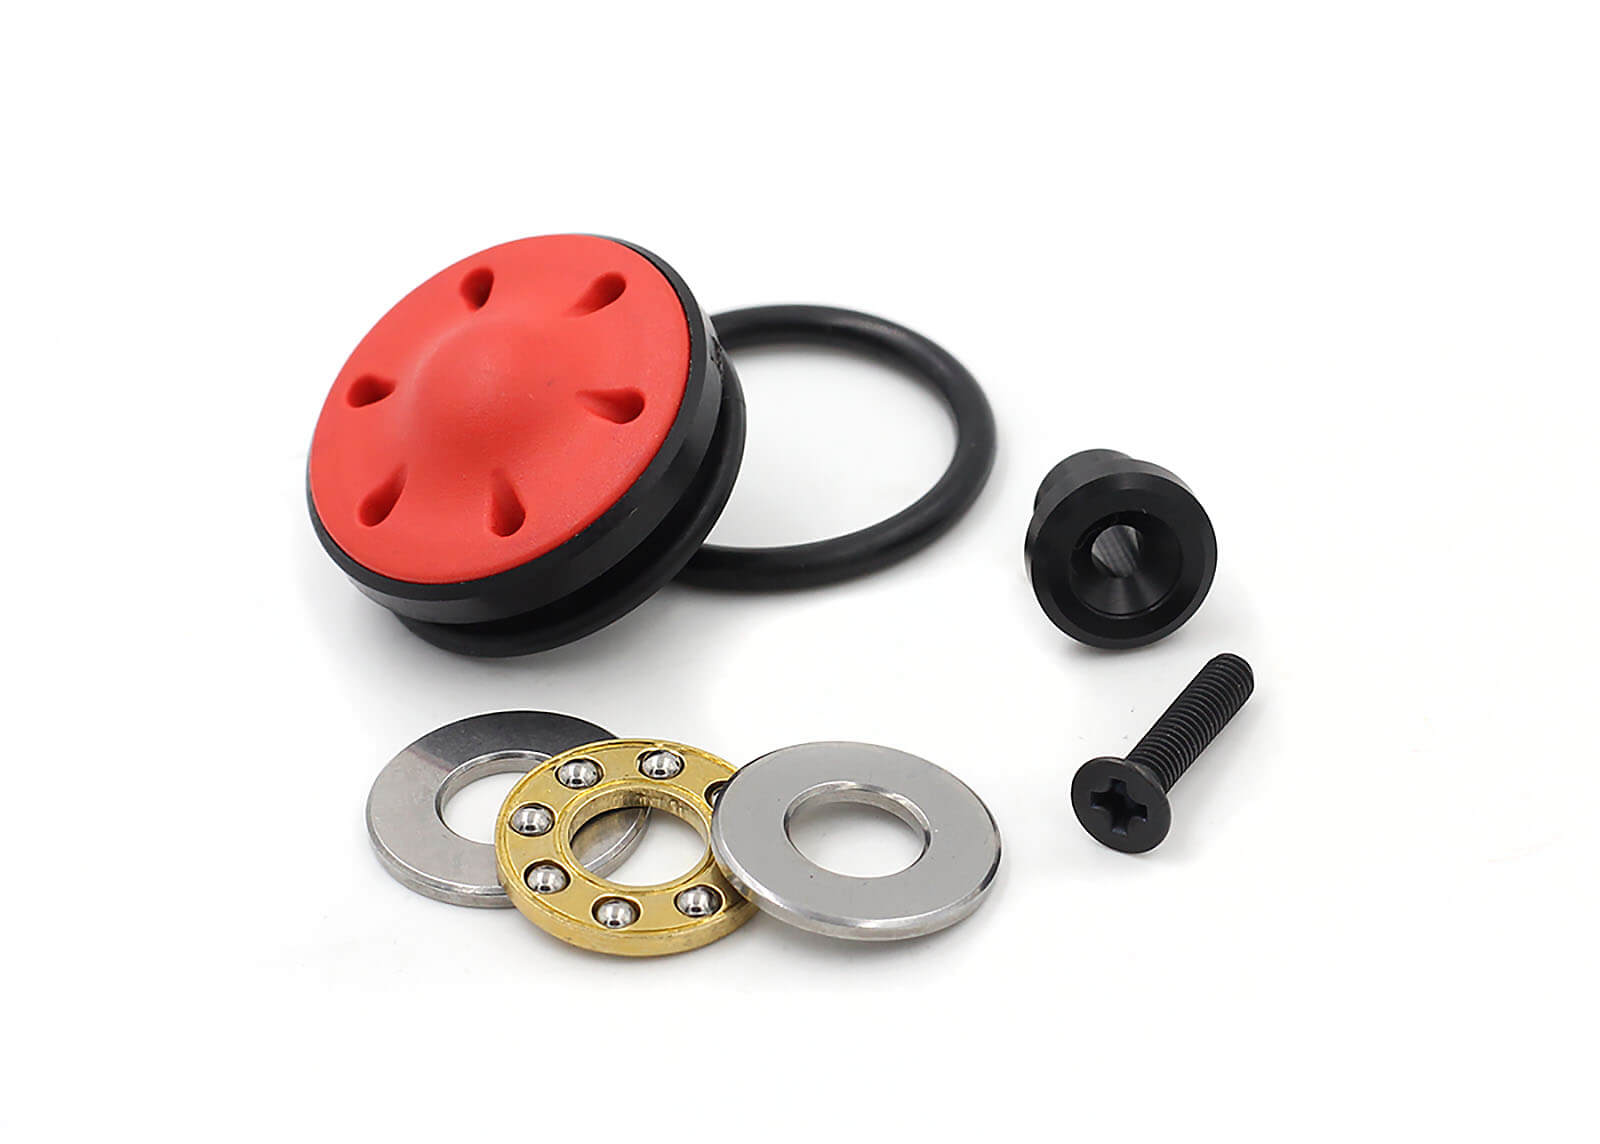 Full Tune up Kit for G3-A3/A4/SG1(Torque, 21.6/ S130+)|CA series - Modify Airsoft parts